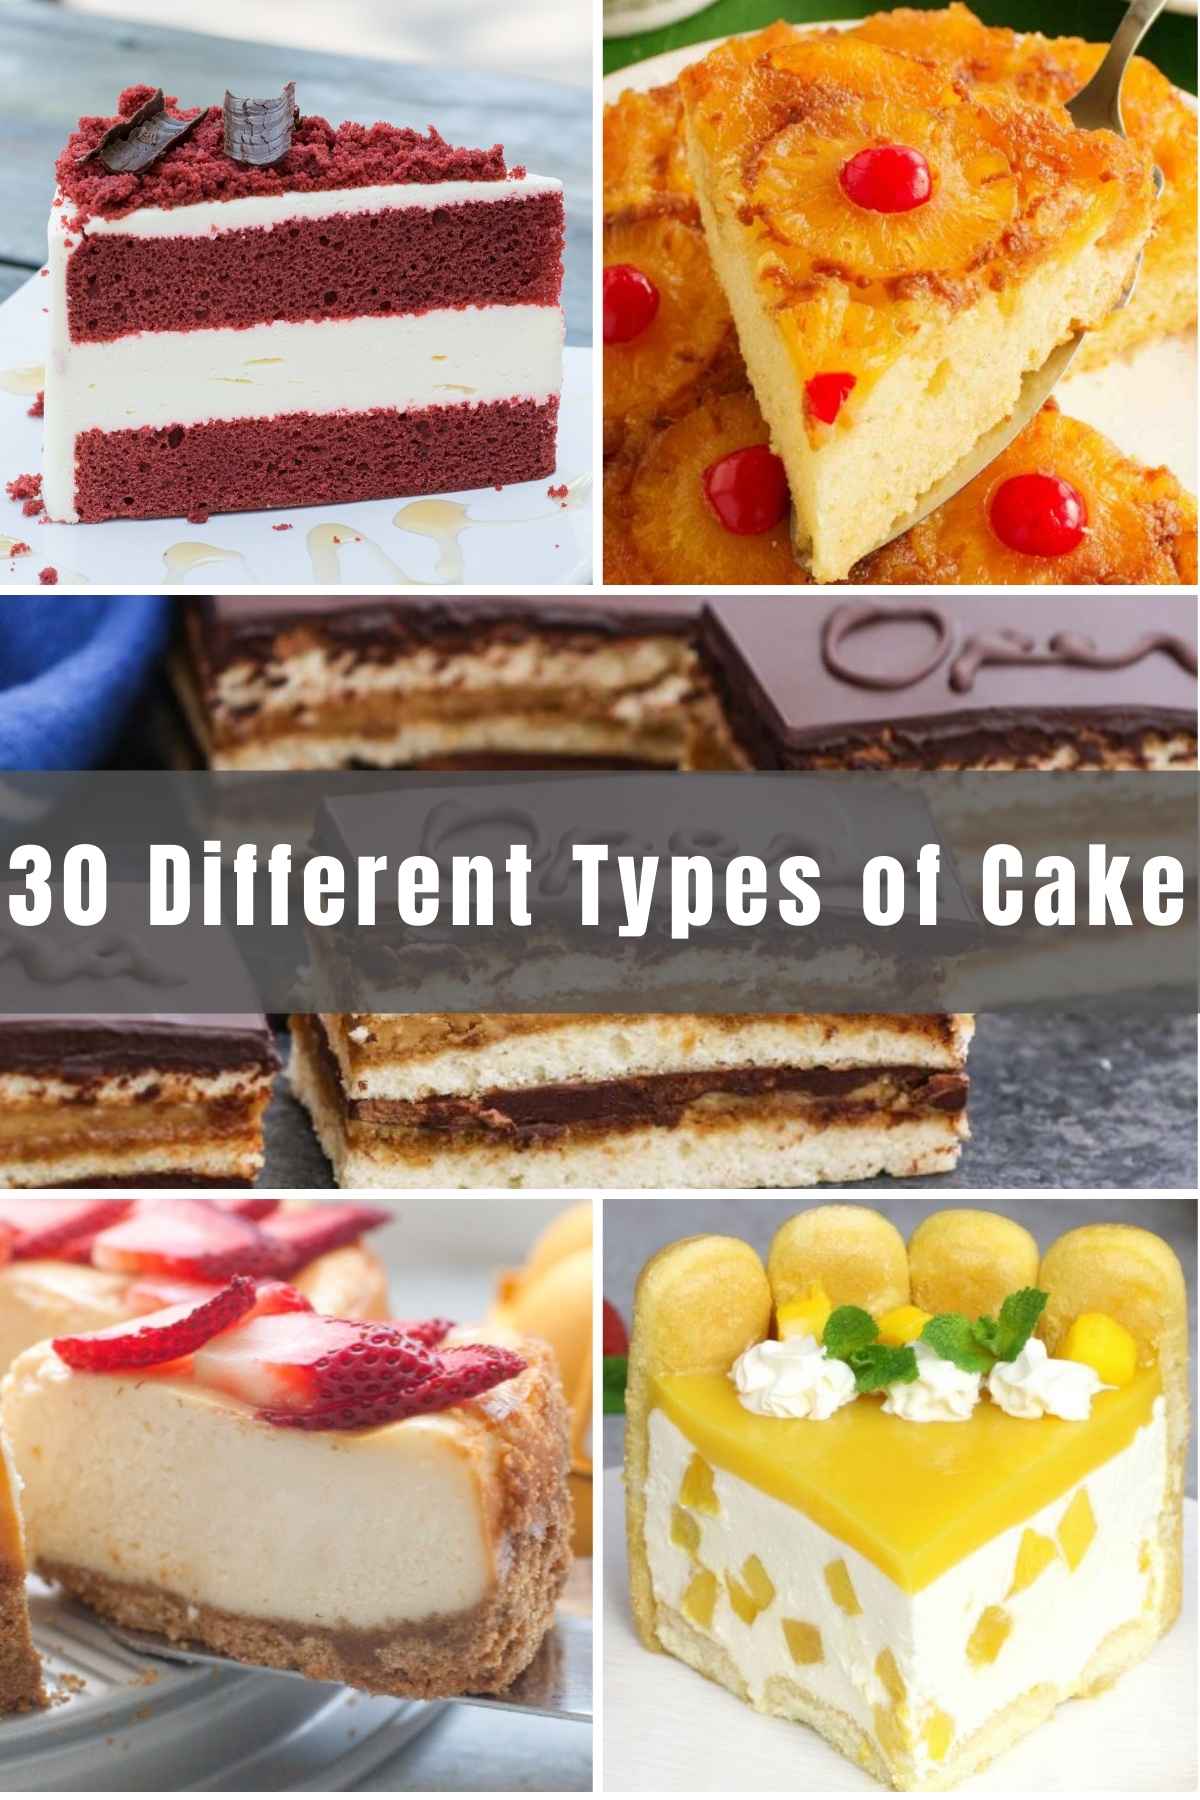 If you’re a fan of programs like The Great British Bake Off and The Great American Baking Show, you know that there are specific names to identify different Types of Cake. We’ve gathered 30 different types of cake and recipes for you to try.